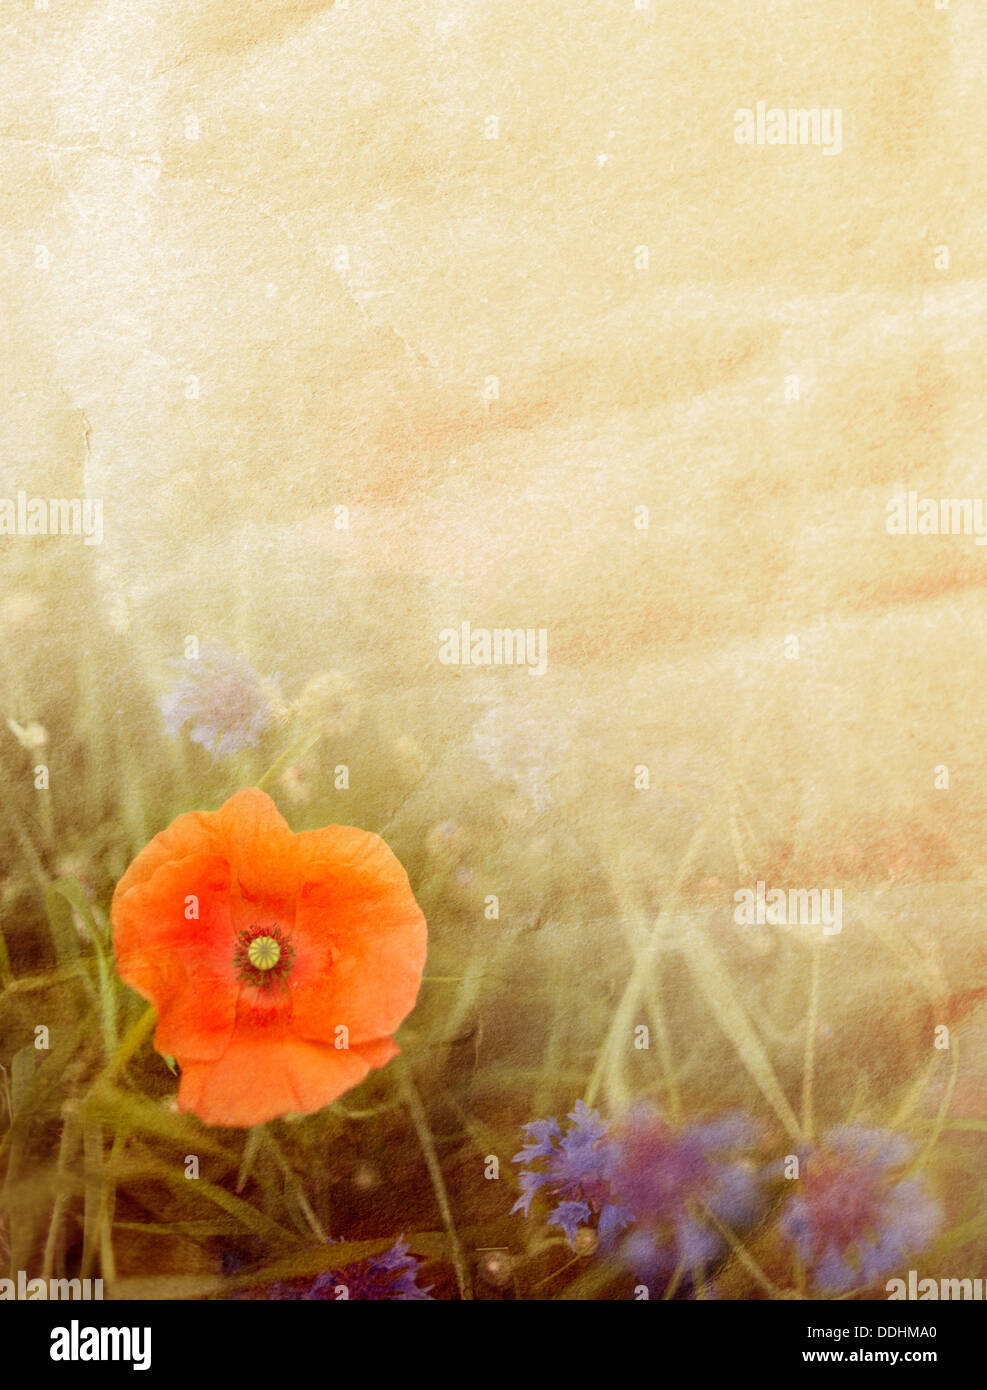 Flower background of poppy, cornflower and paper texture Stock Photo